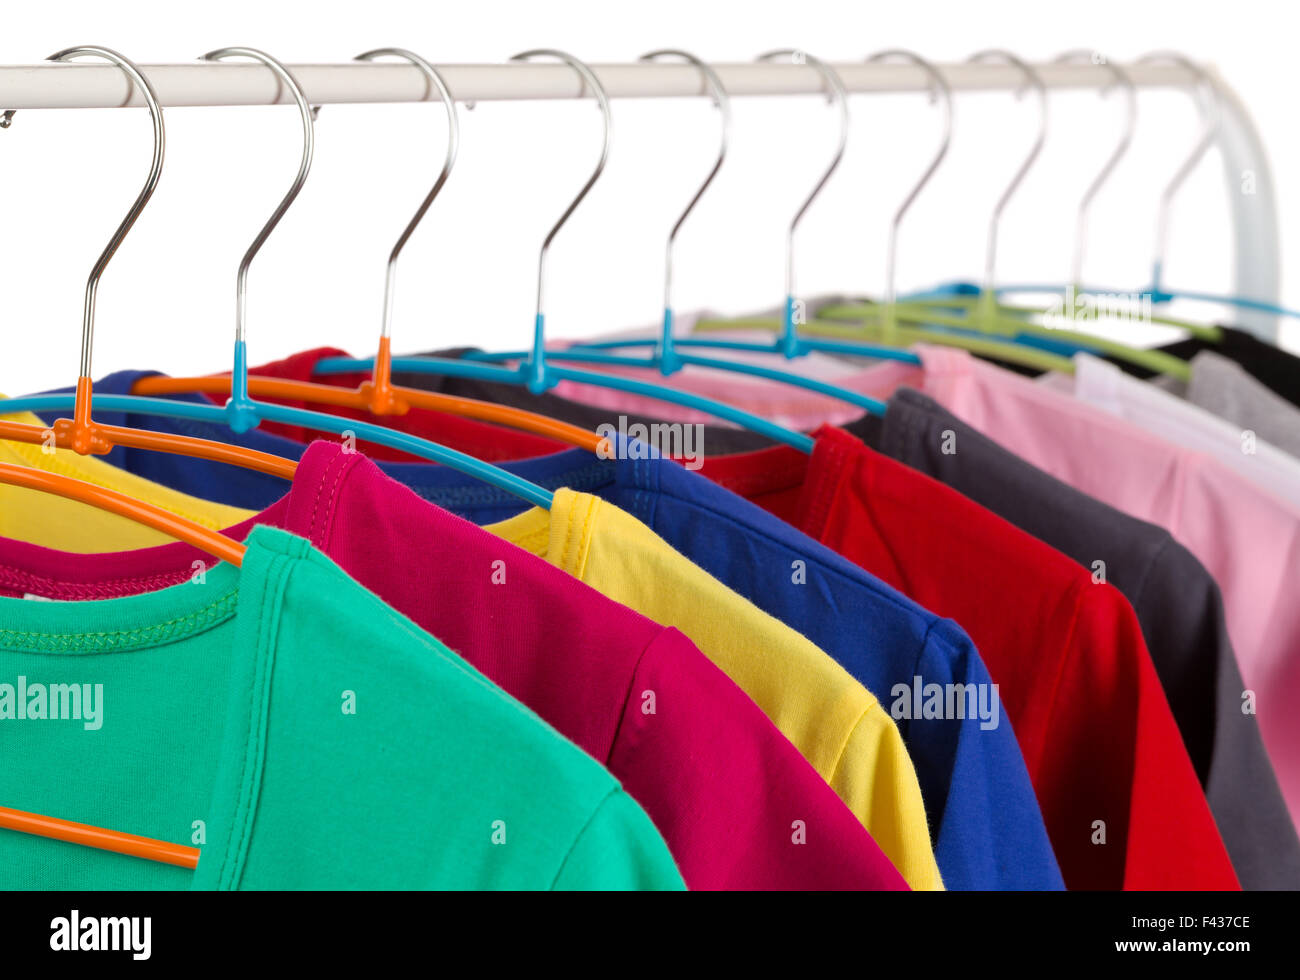 Colorful shirts on hangers Stock Photo